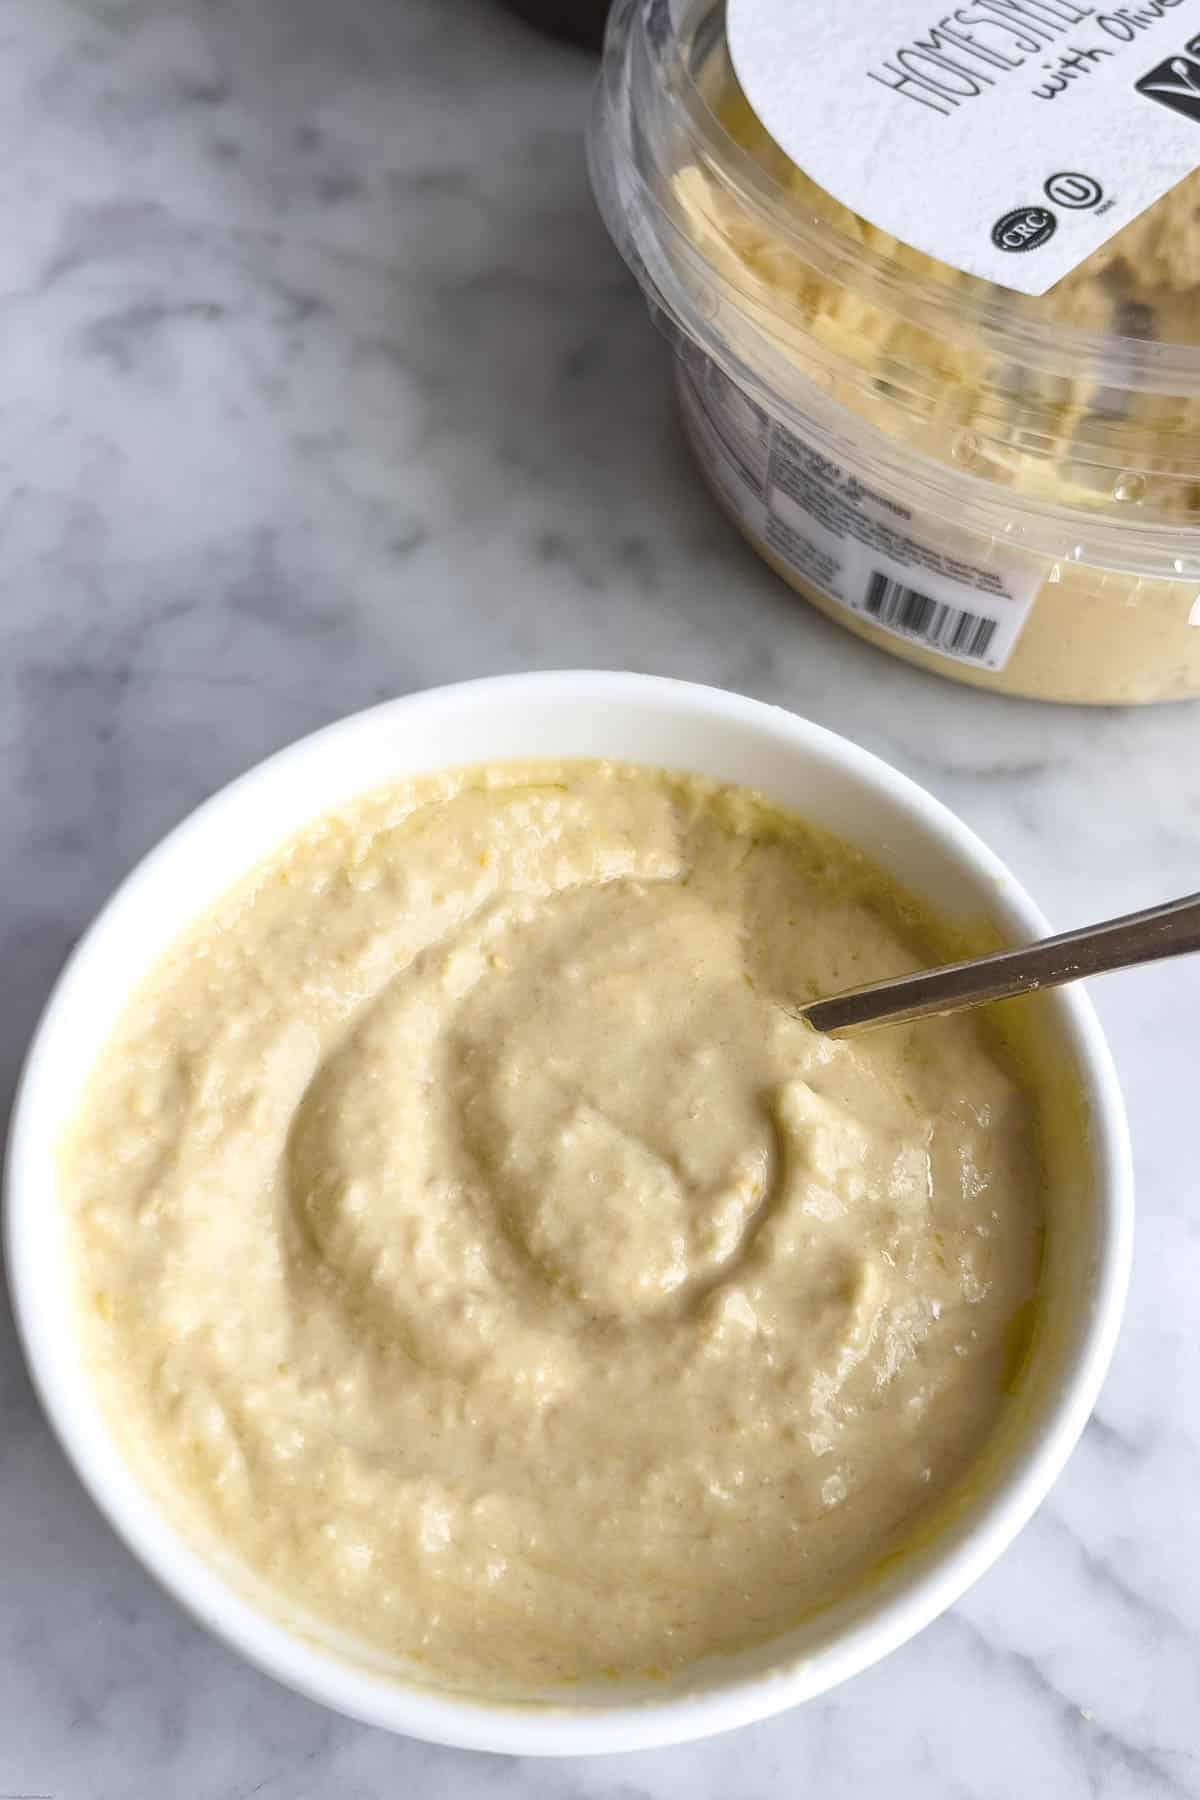 Store-bought hummus in a white bowl with a silver spoon, and a opened container of hummus in the background.